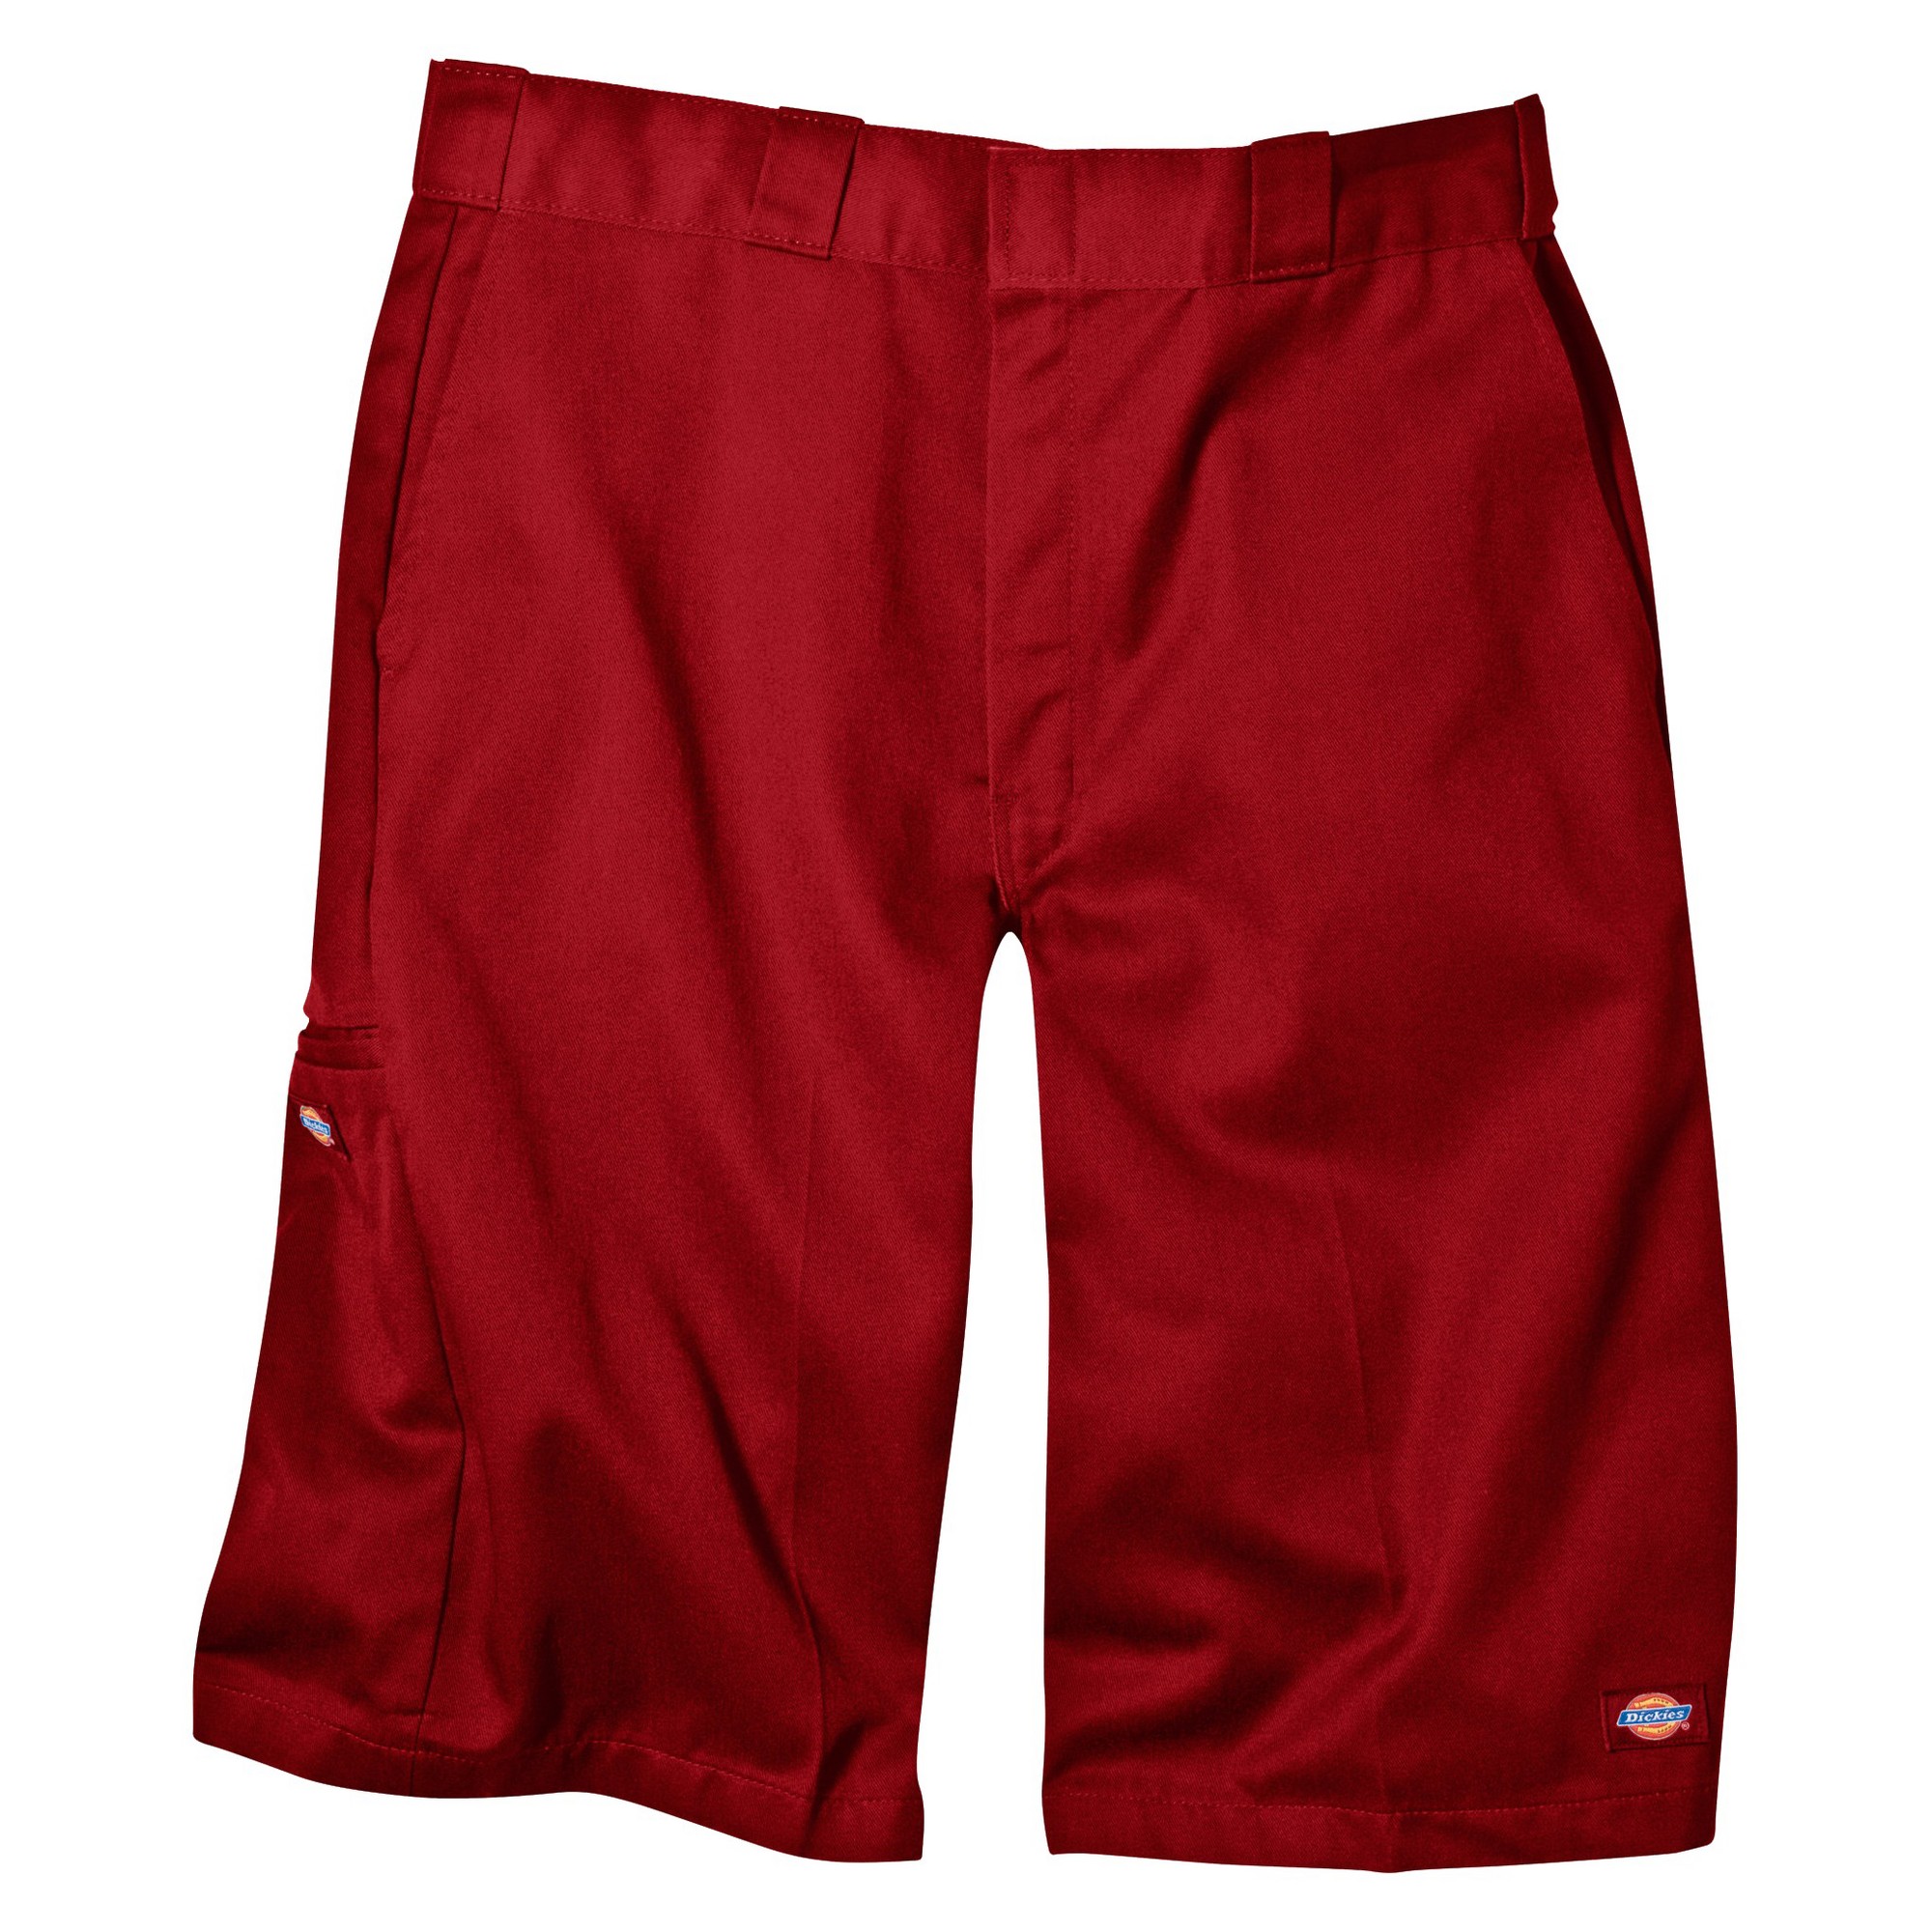 'Dickies Men's Loose Fit Twill 13'' Multi-Pocket Work Shorts- English Red 33'